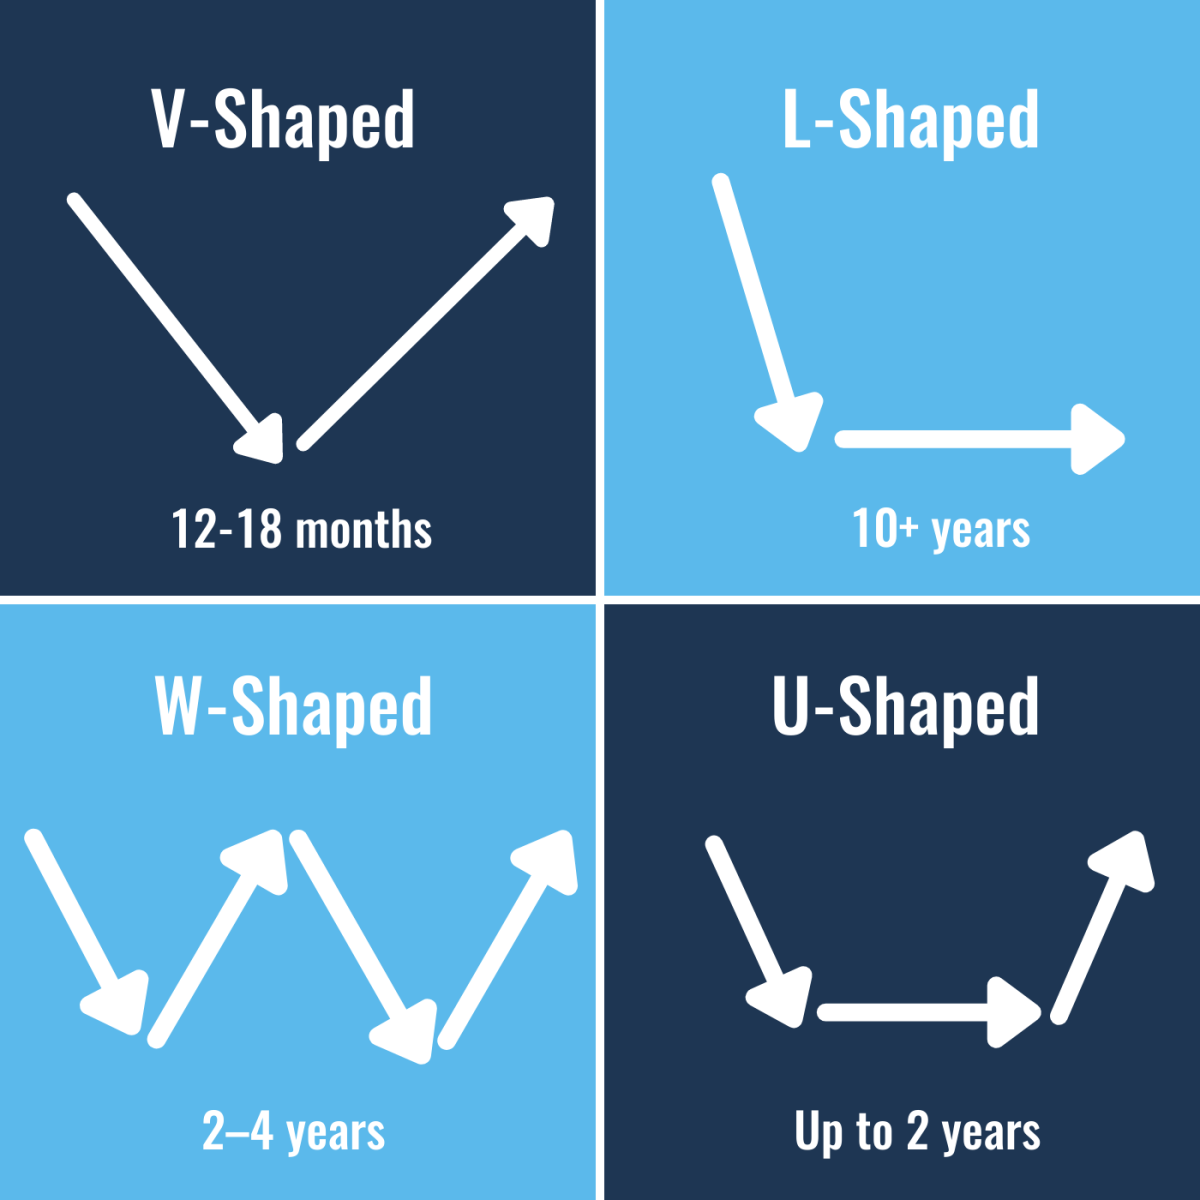 A mostly blue and white graphic showing V-shaped, L-shaped, W-shaped, and U-shaped recessions using arrows